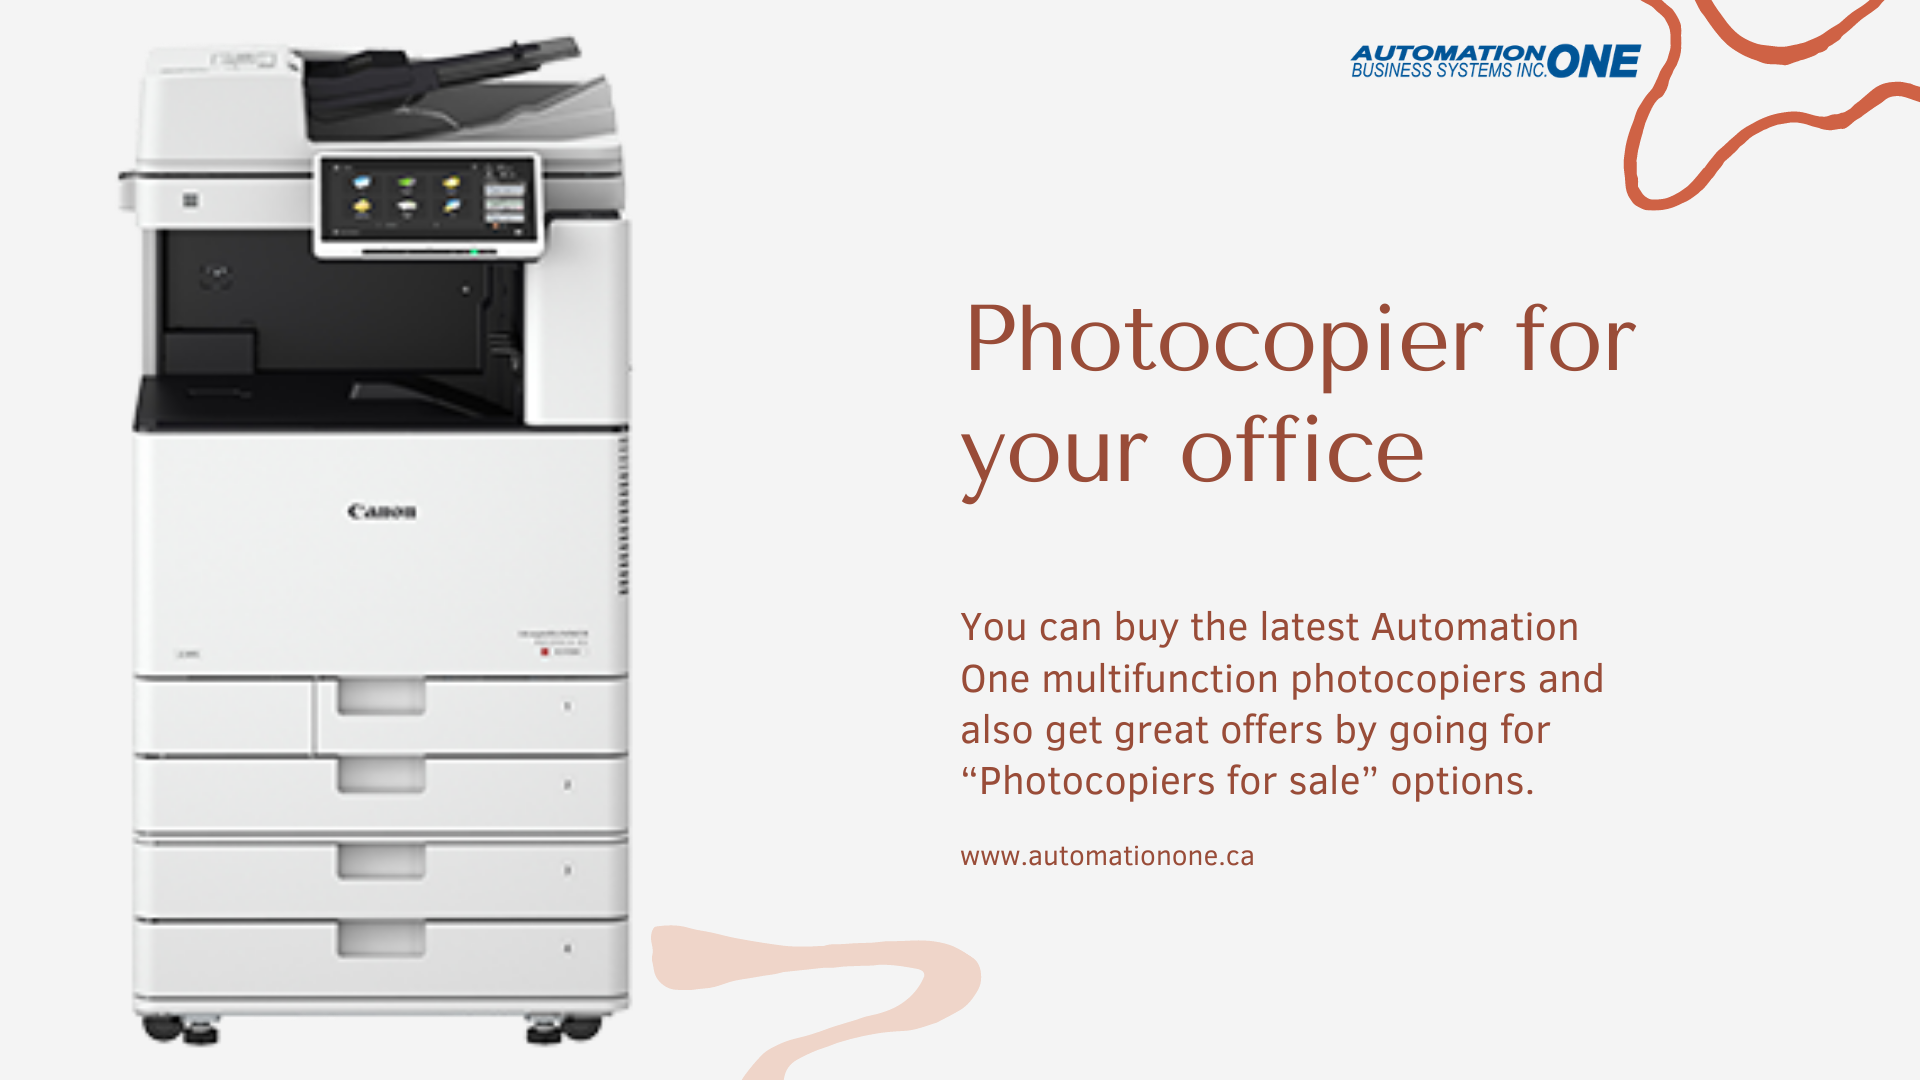 What to consider when buying a photocopier for your office?